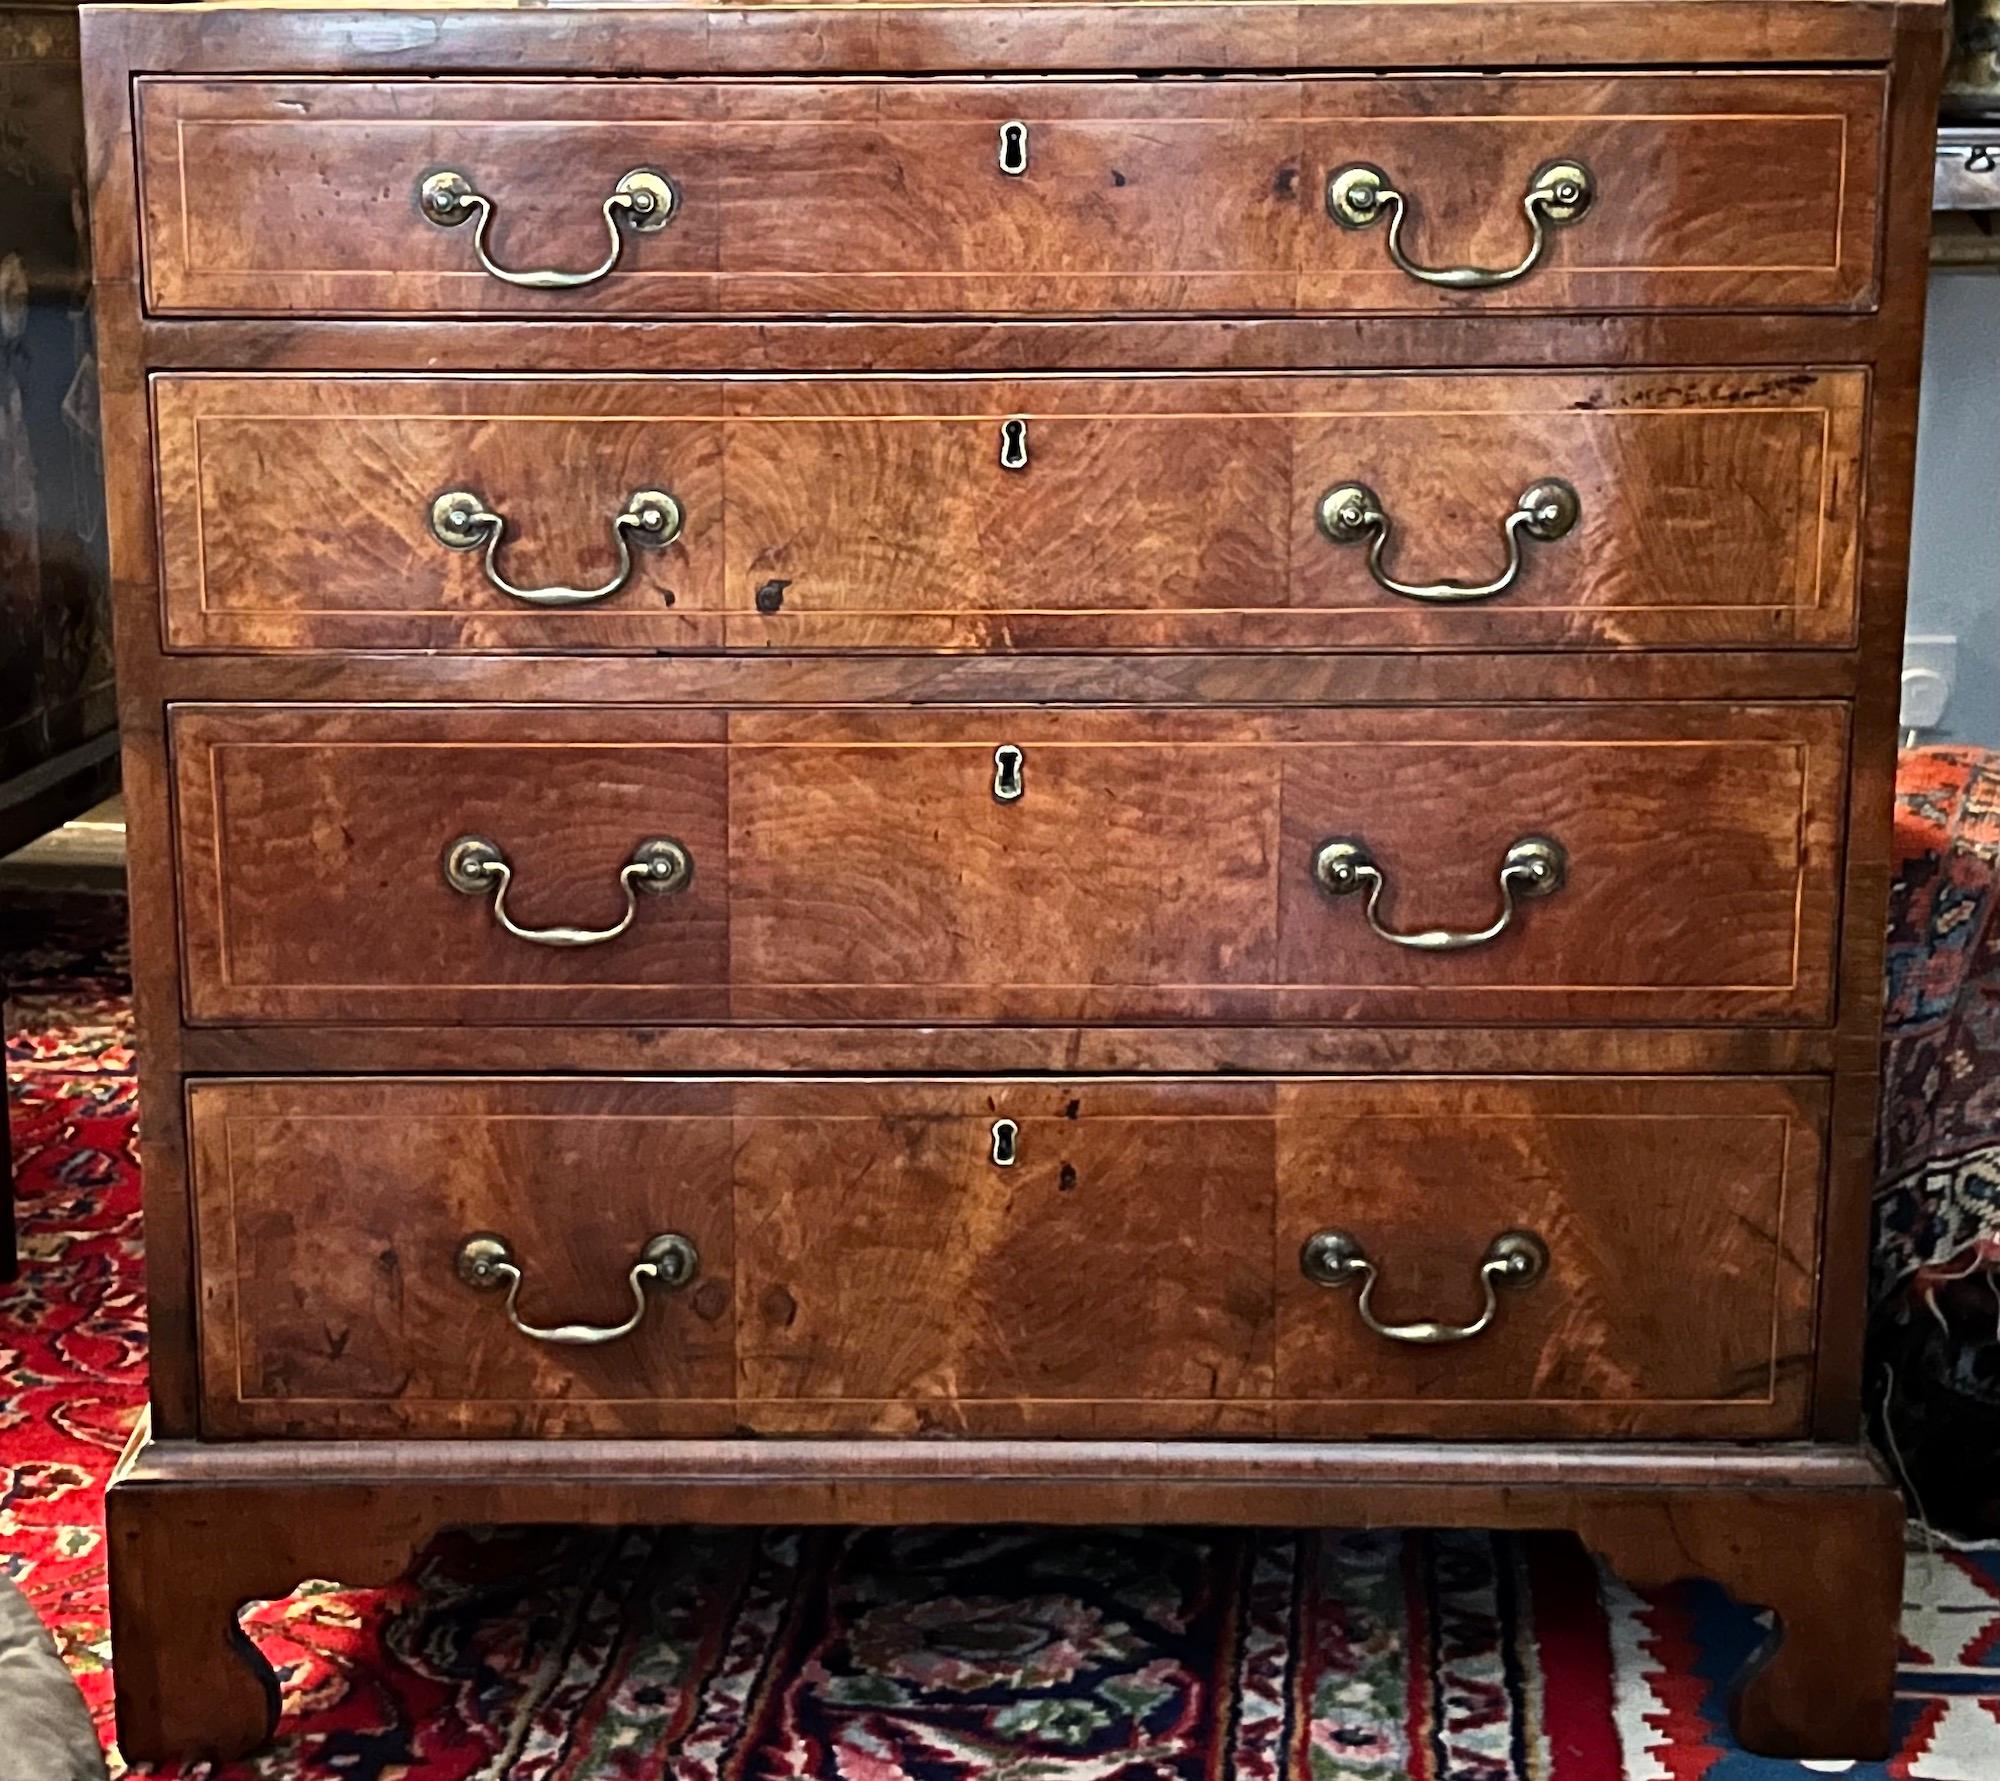 A small English George II period walnut caddy-top chest.

Ca 1740-1760.

Nb. These compact proportions, caddy top, four graduated long drawers, and its original handles, locks and feet distinguish this Georgian walnut chest, or commode.

The